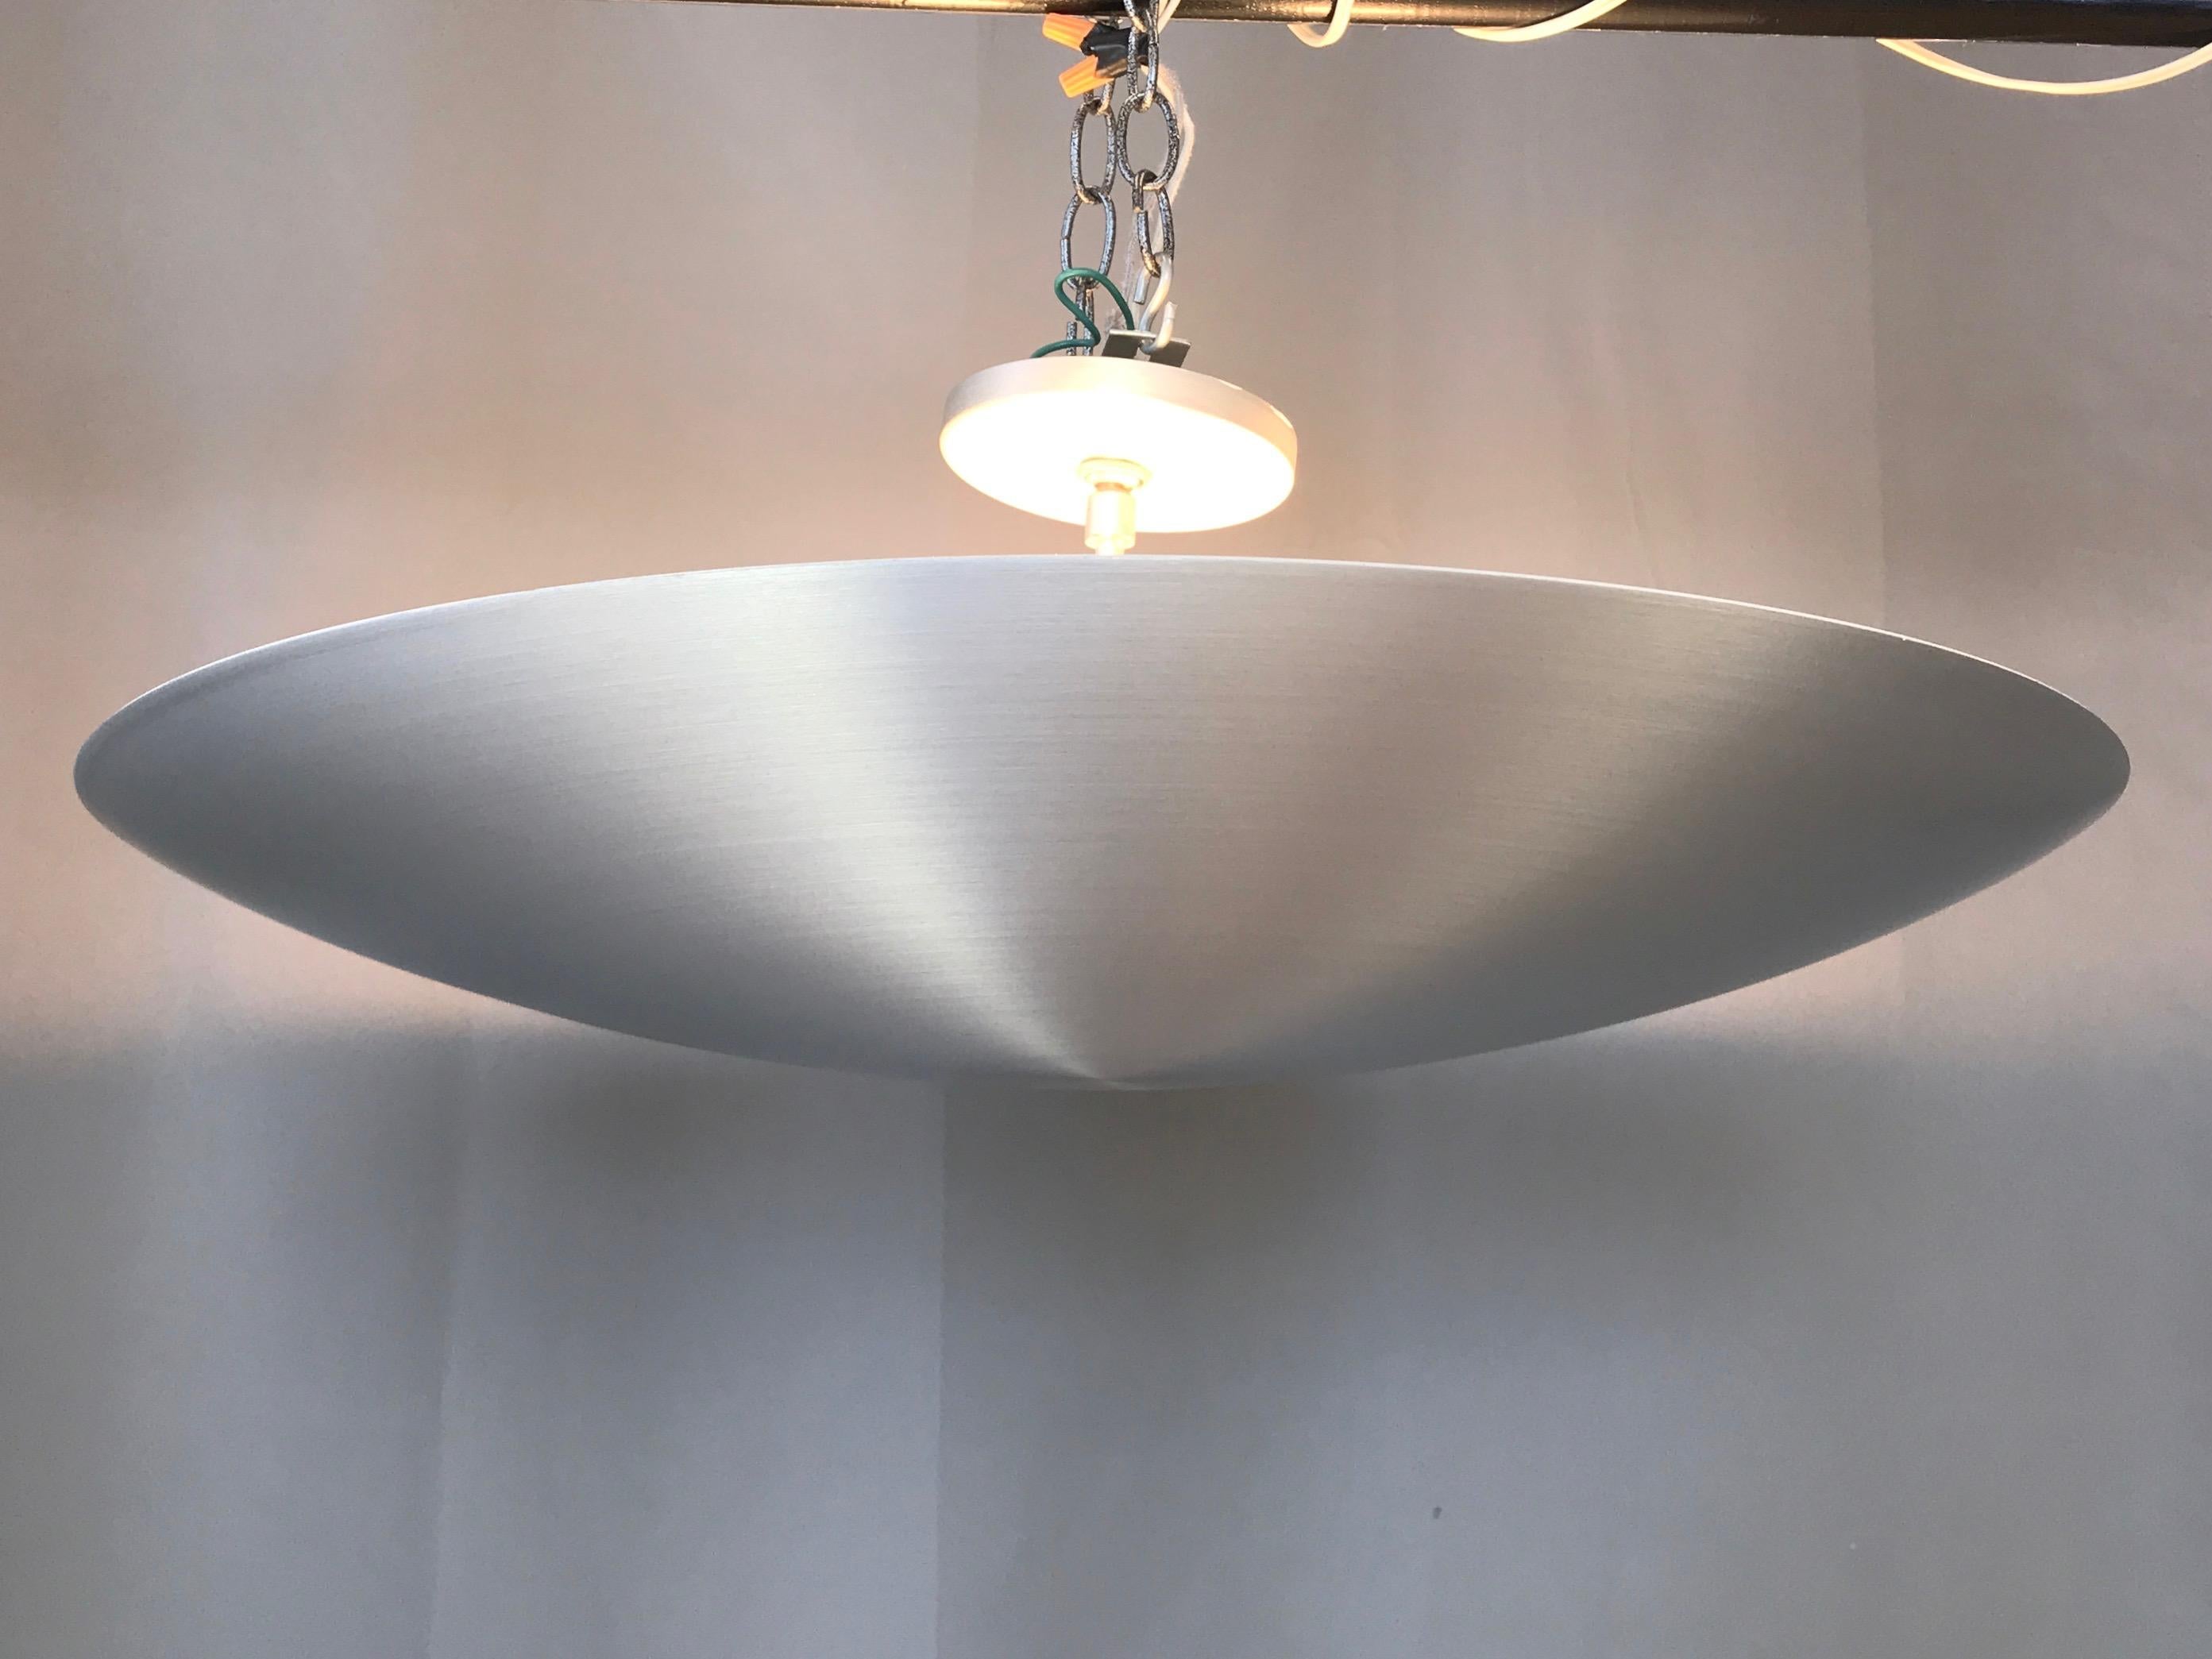 An exactingly fabricated and uncommon spun aluminum pendant ceiling light by Nova Industries of San Leandro, California.

Large, low profile, super sleek saucer design with brushed finish appears to hover UFO-like over head. Three ceramic sockets,